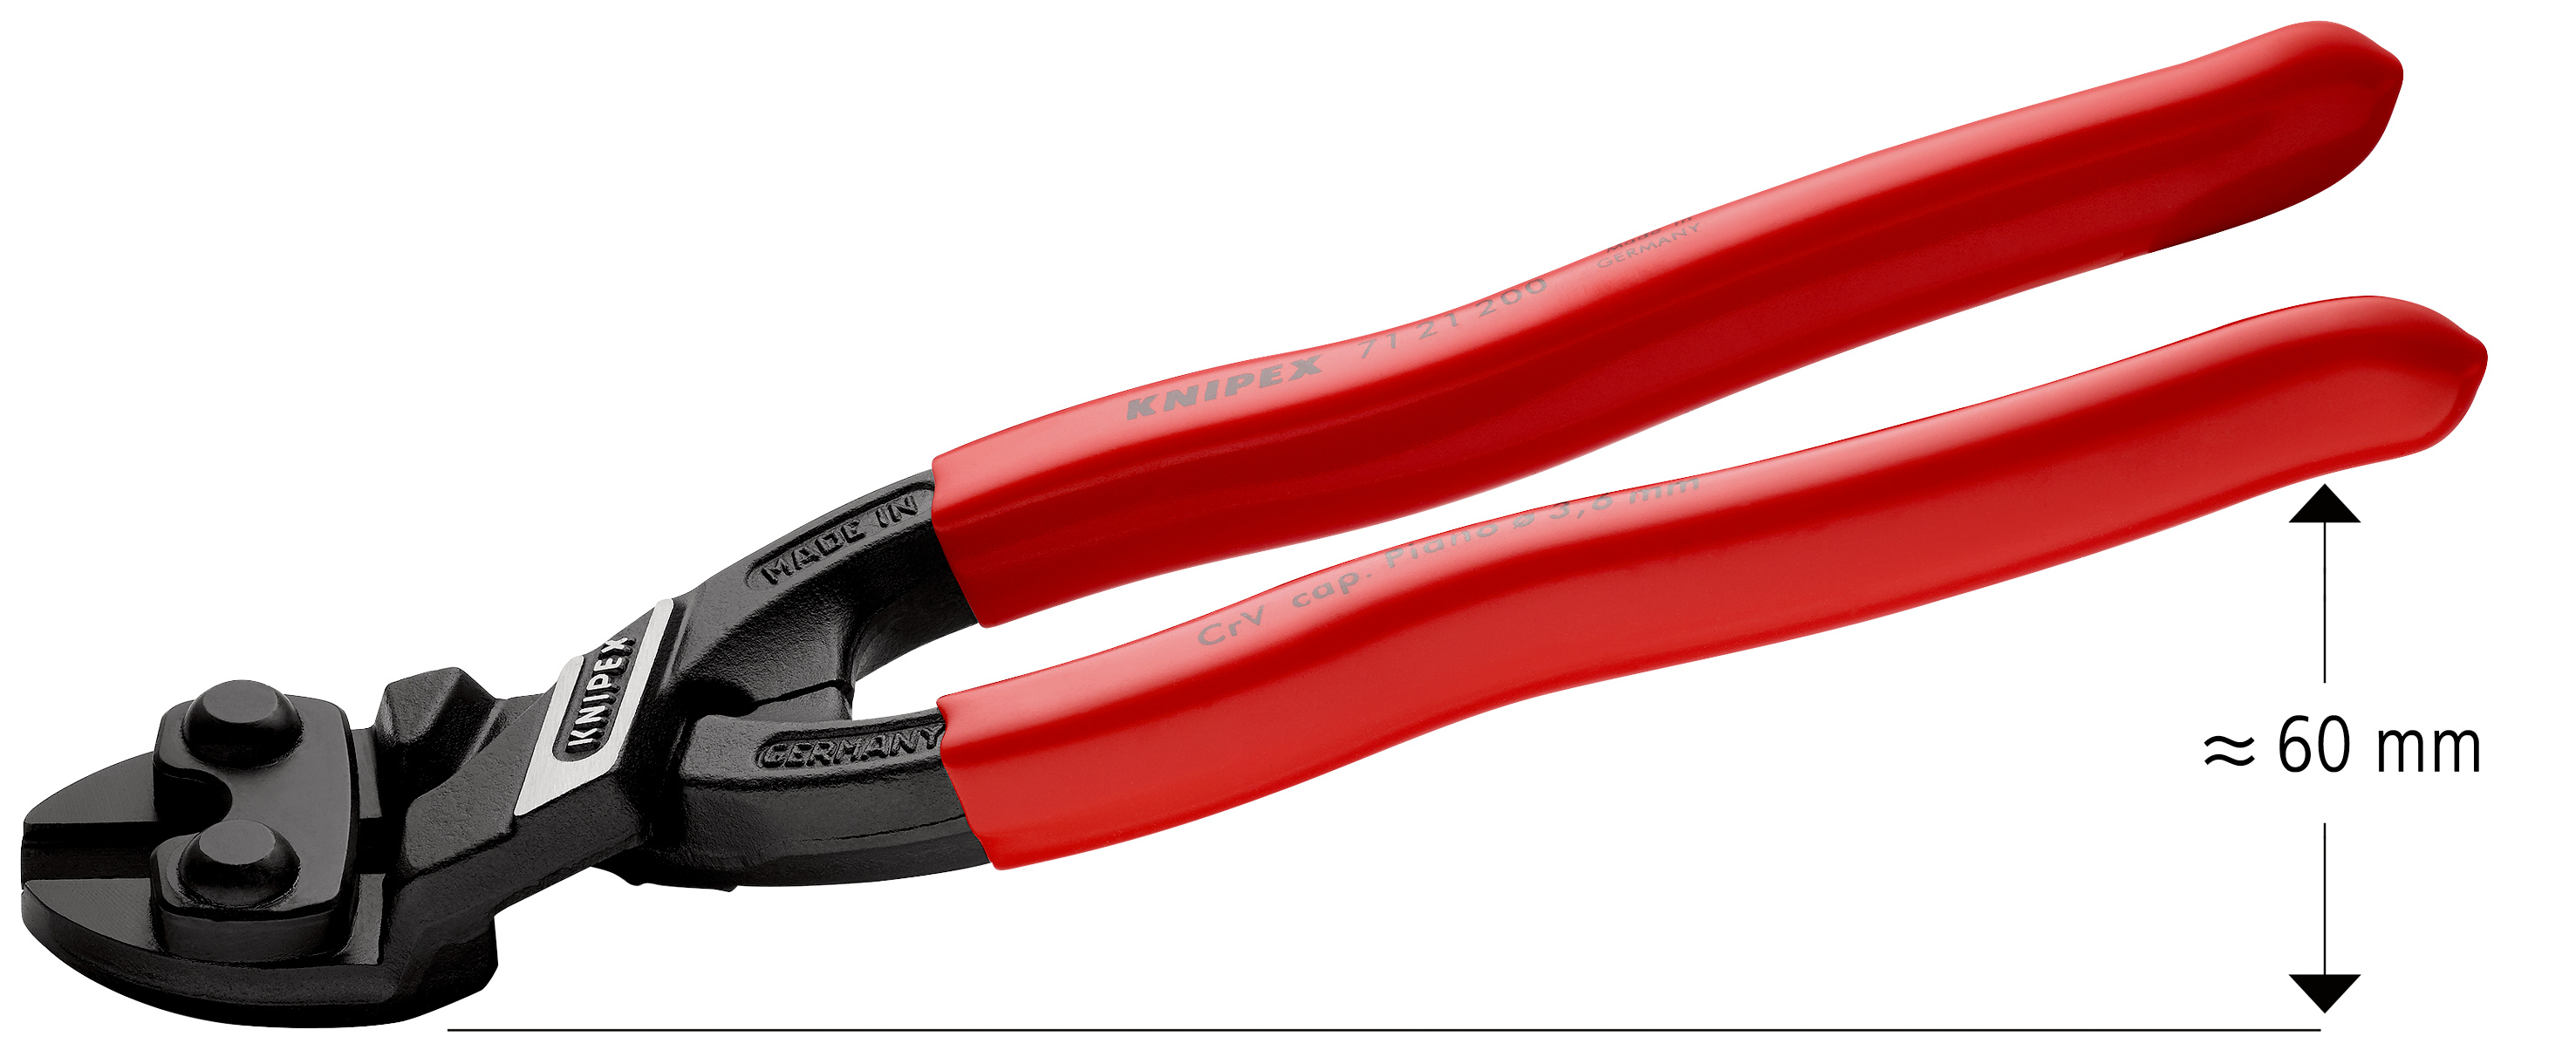 KNIPEX 7111200 8 inch Compact Wire Bolt Cutter for sale online 